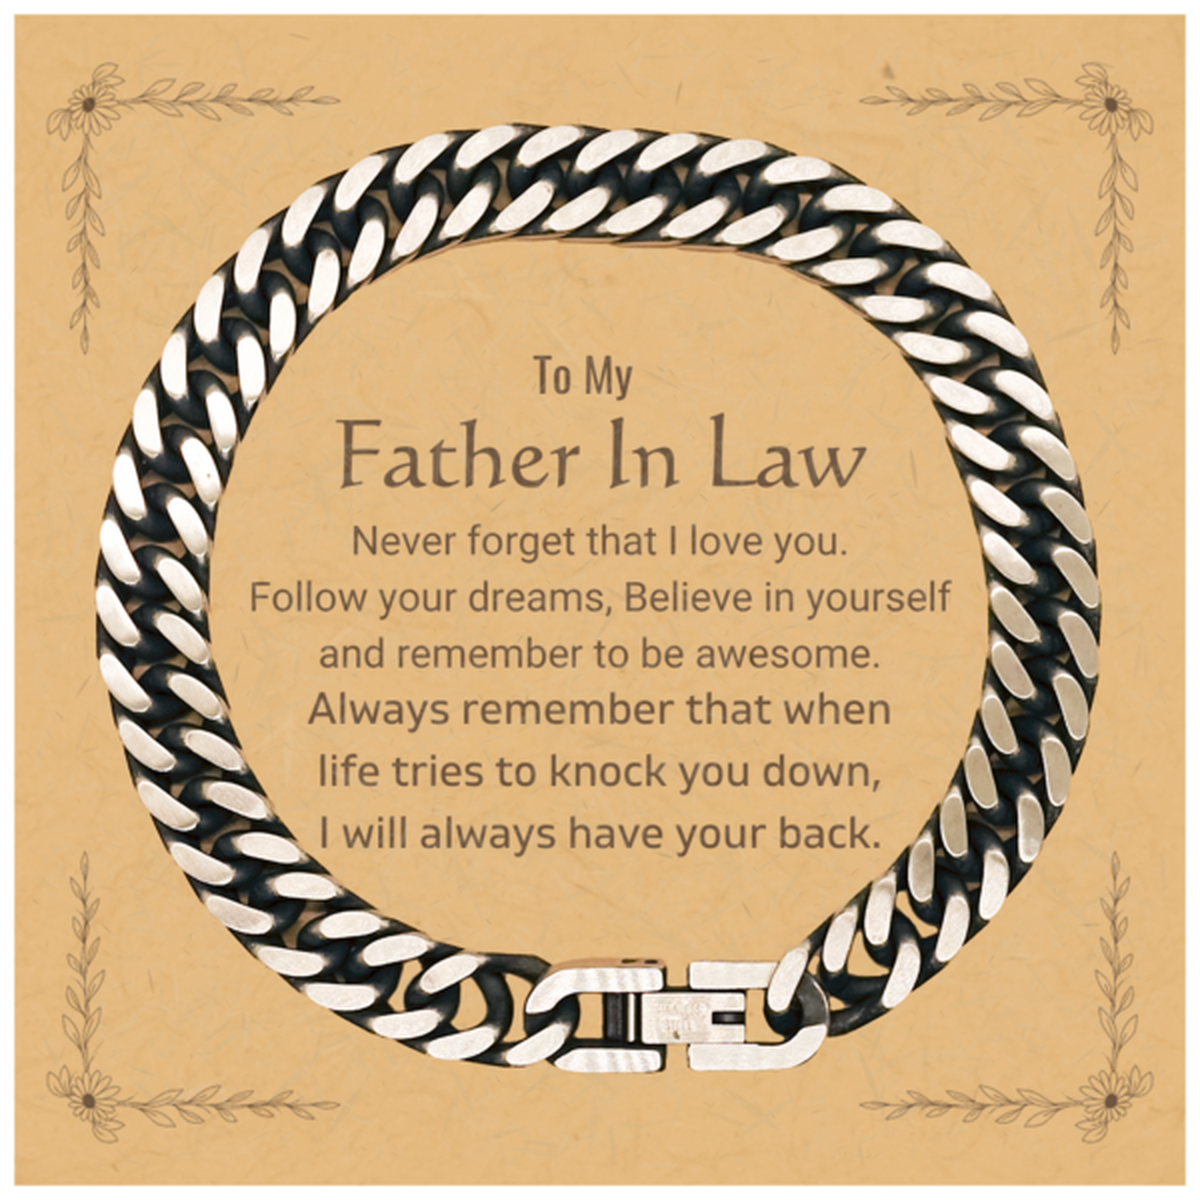 Inspirational Gifts for Father In Law, Follow your dreams, Believe in yourself, Father In Law Cuban Link Chain Bracelet, Birthday Christmas Unique Gifts For Father In Law